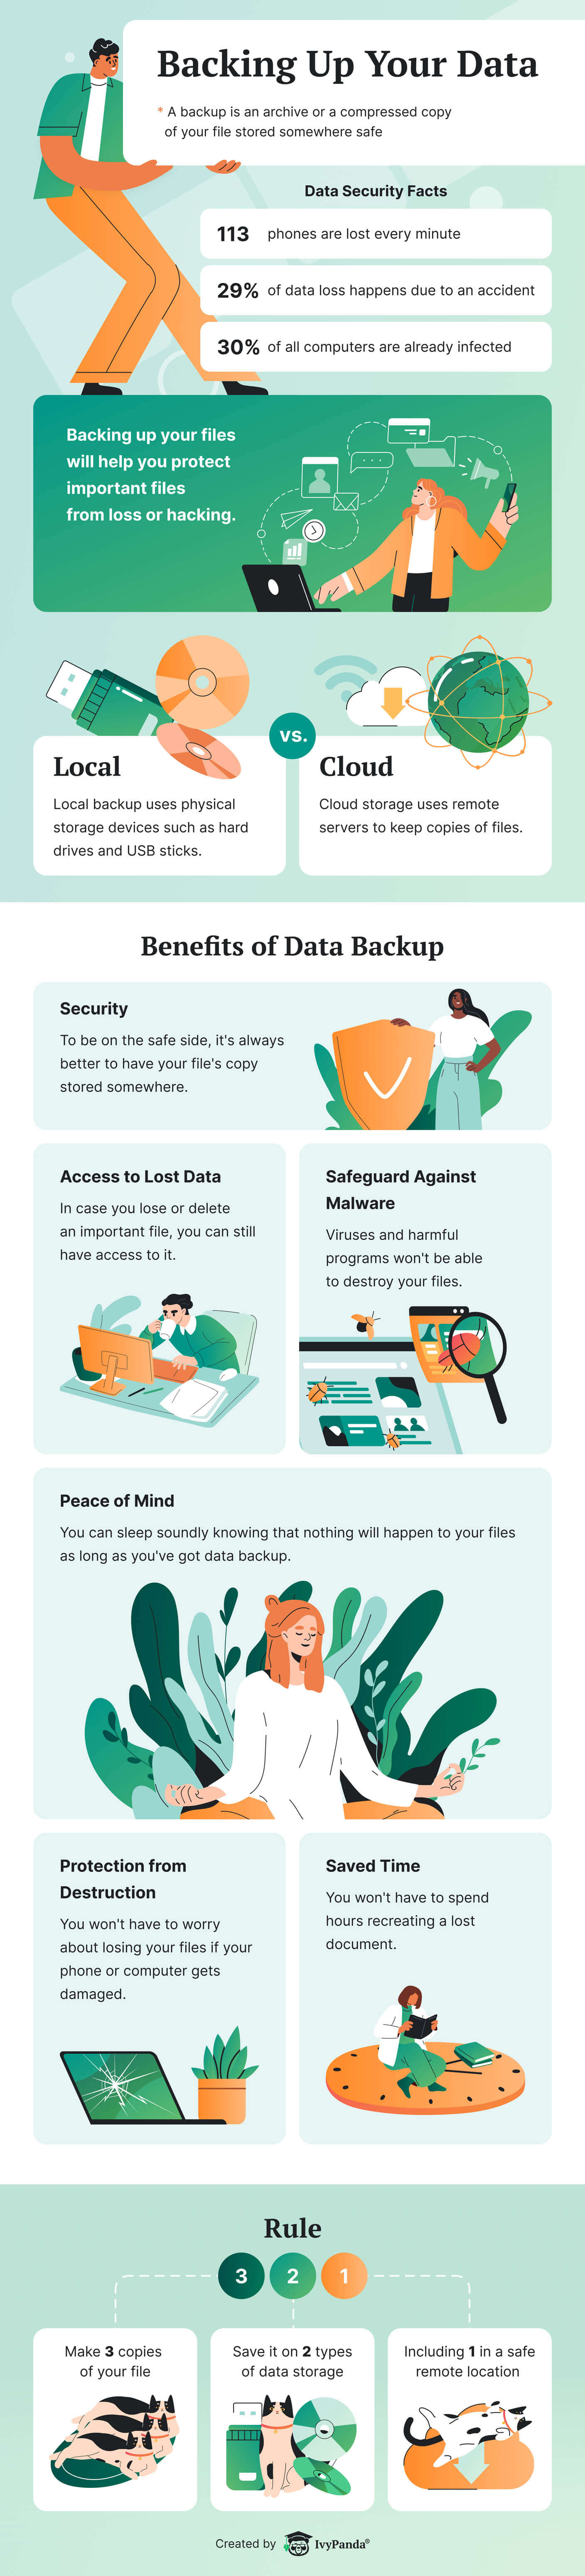 The infographic shows facts, benefits, and ways of backing up your data. 